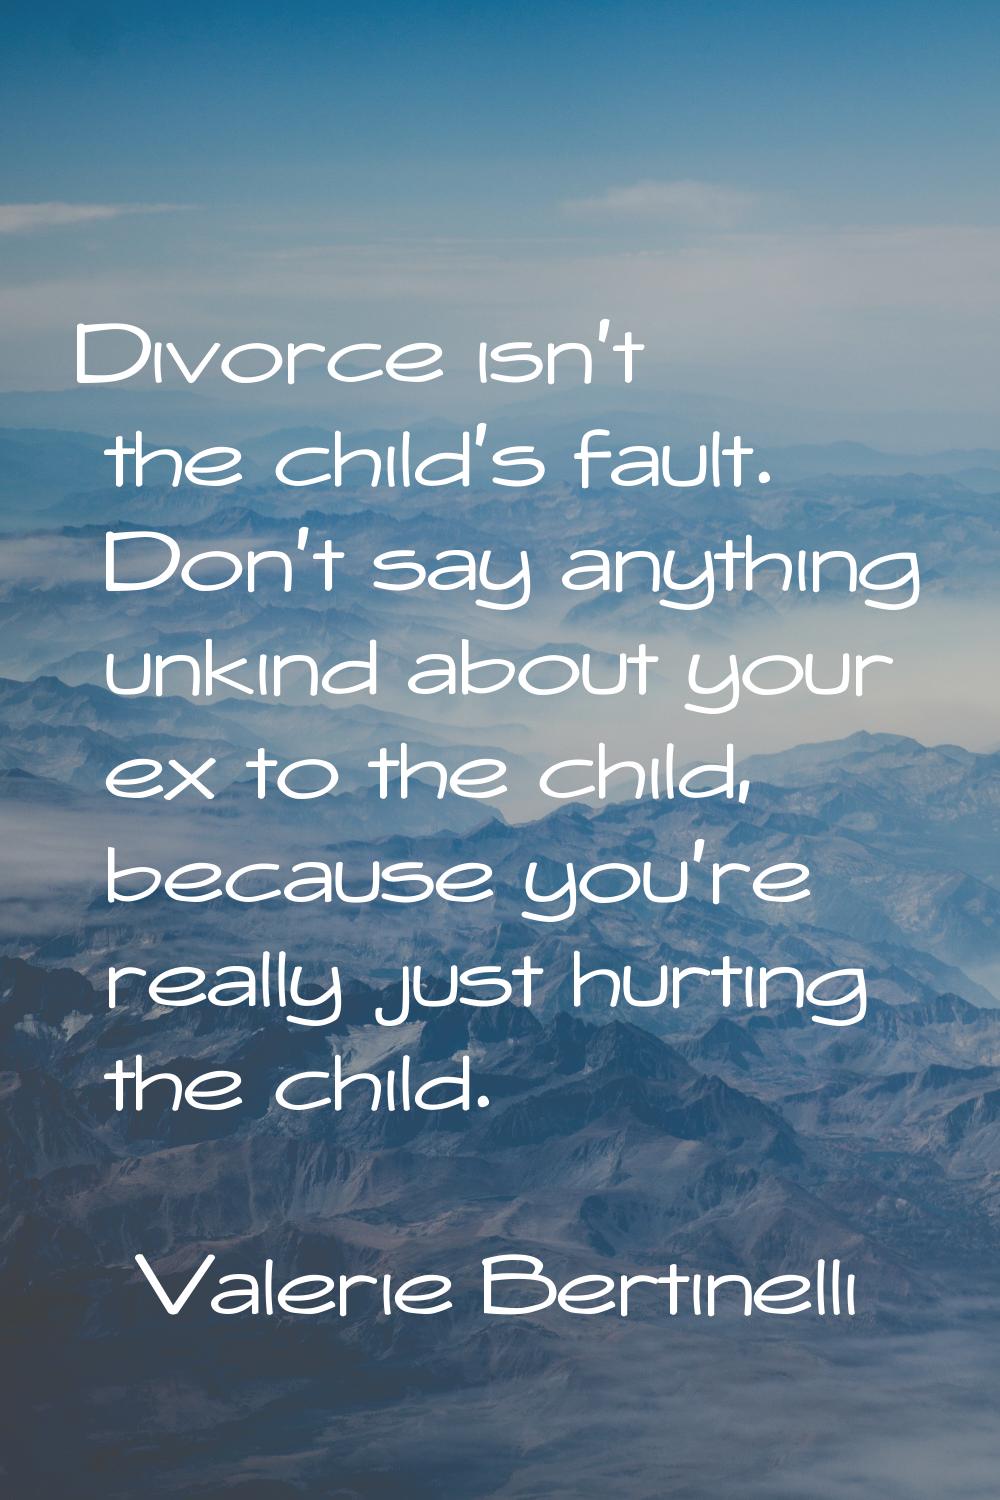 Divorce isn't the child's fault. Don't say anything unkind about your ex to the child, because you'